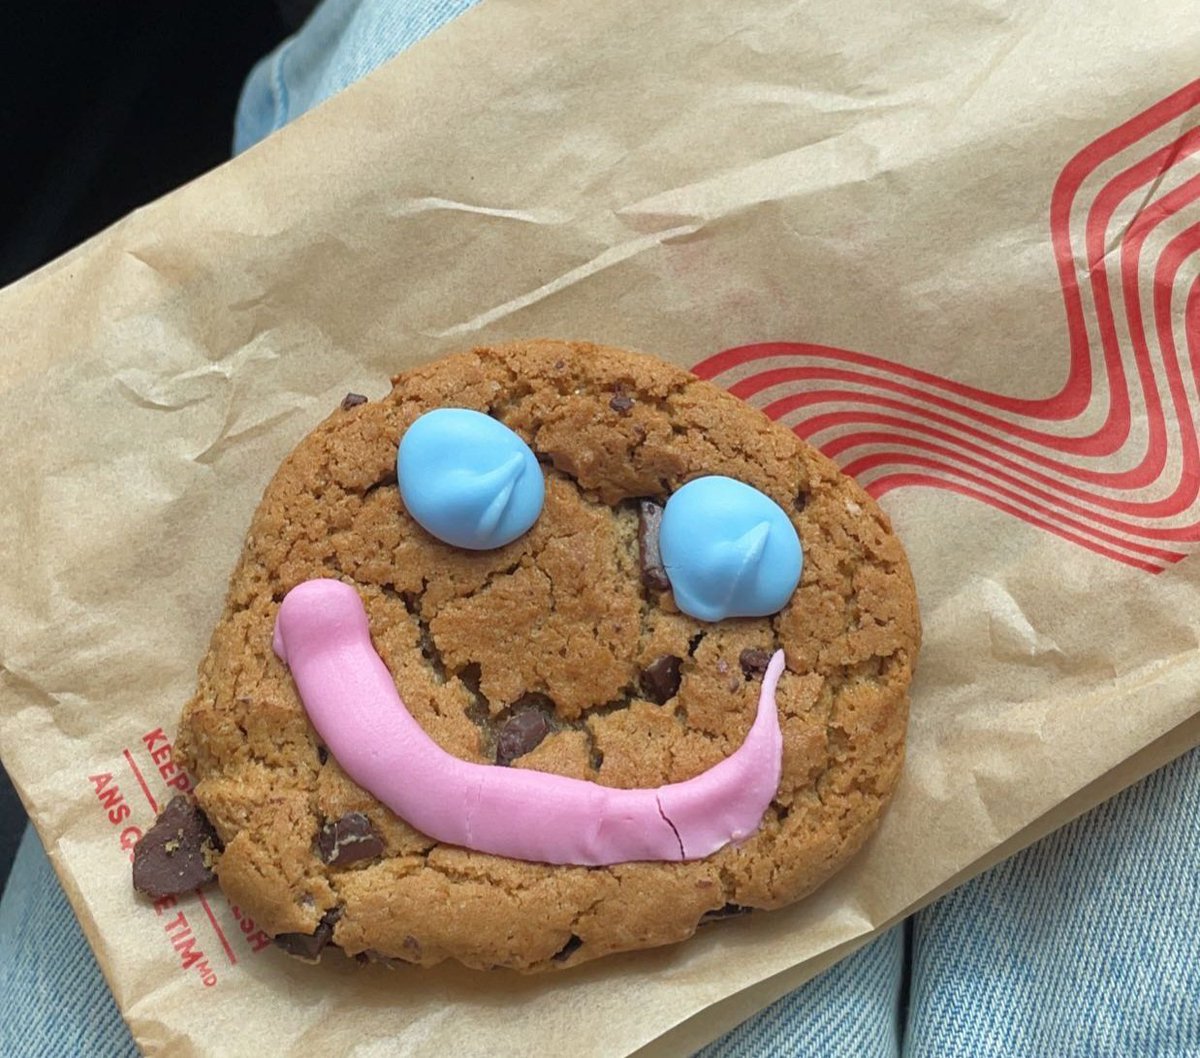 Smiley cookie cuz there ain't shit to smile about in my life